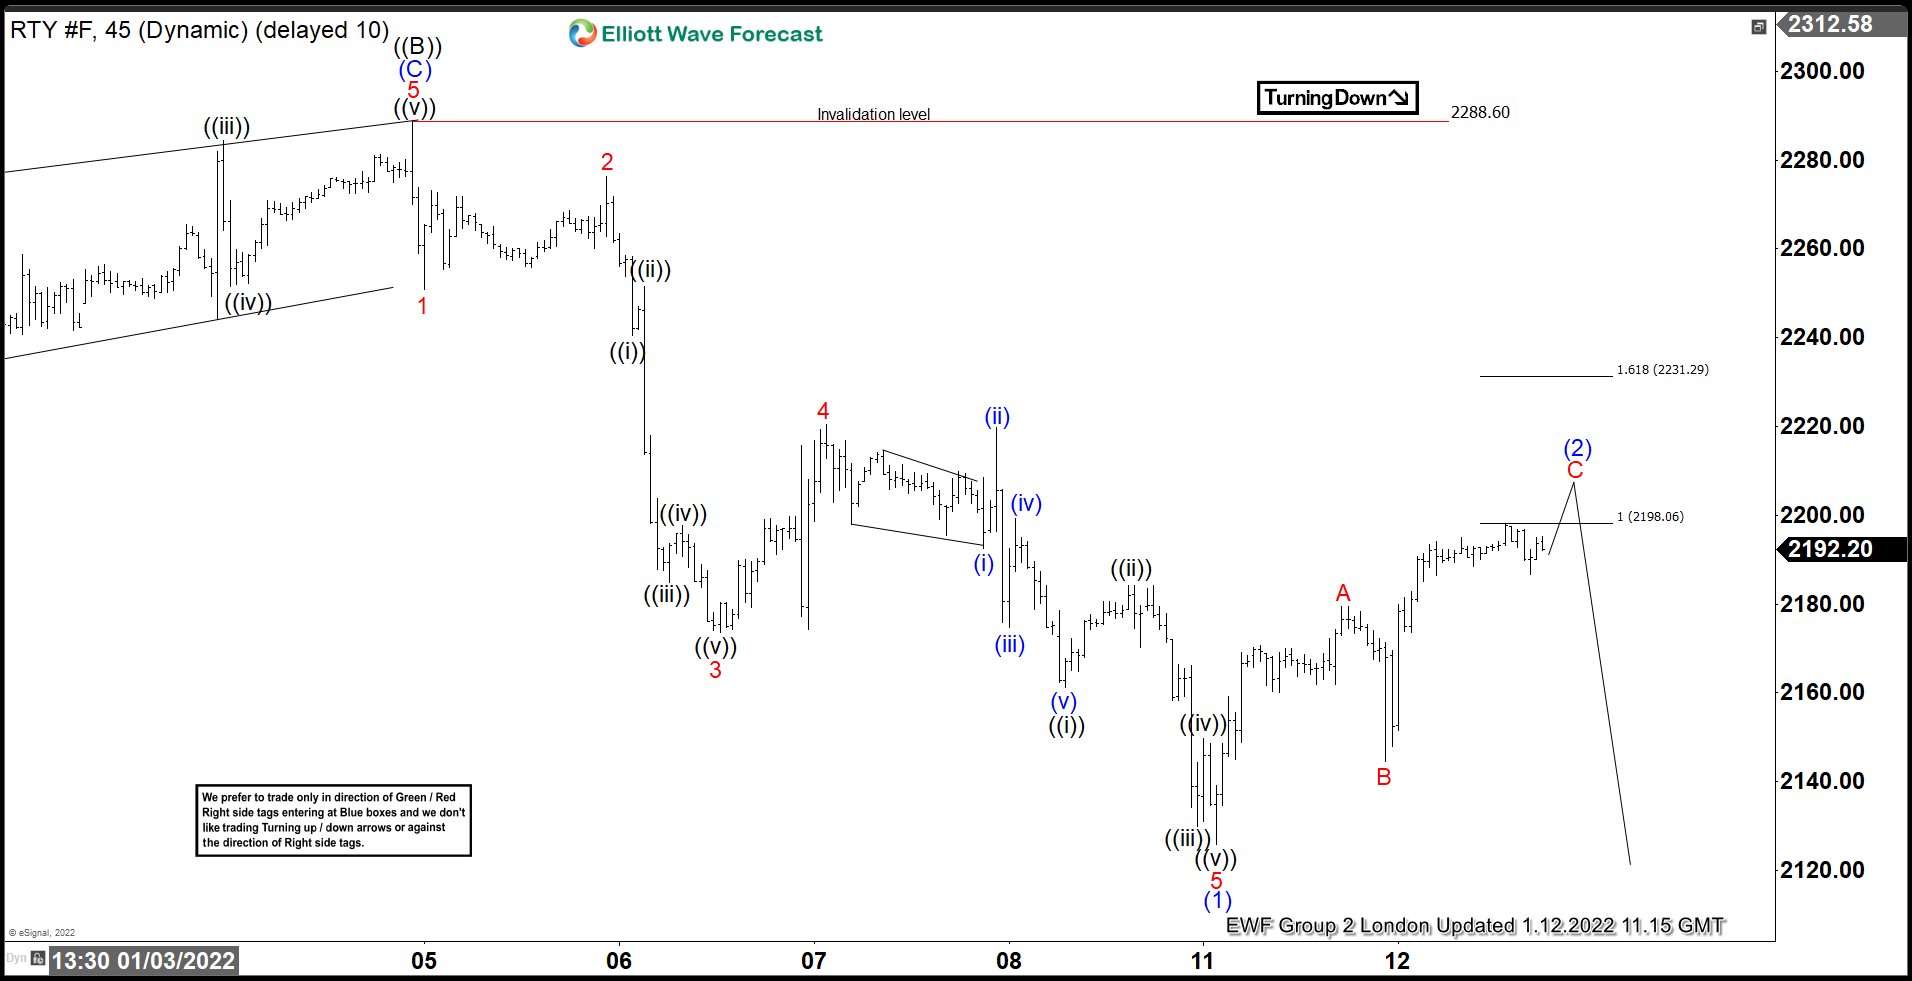 Russell Futures ($RTY #F) : Elliott Wave Forecasting The Decline